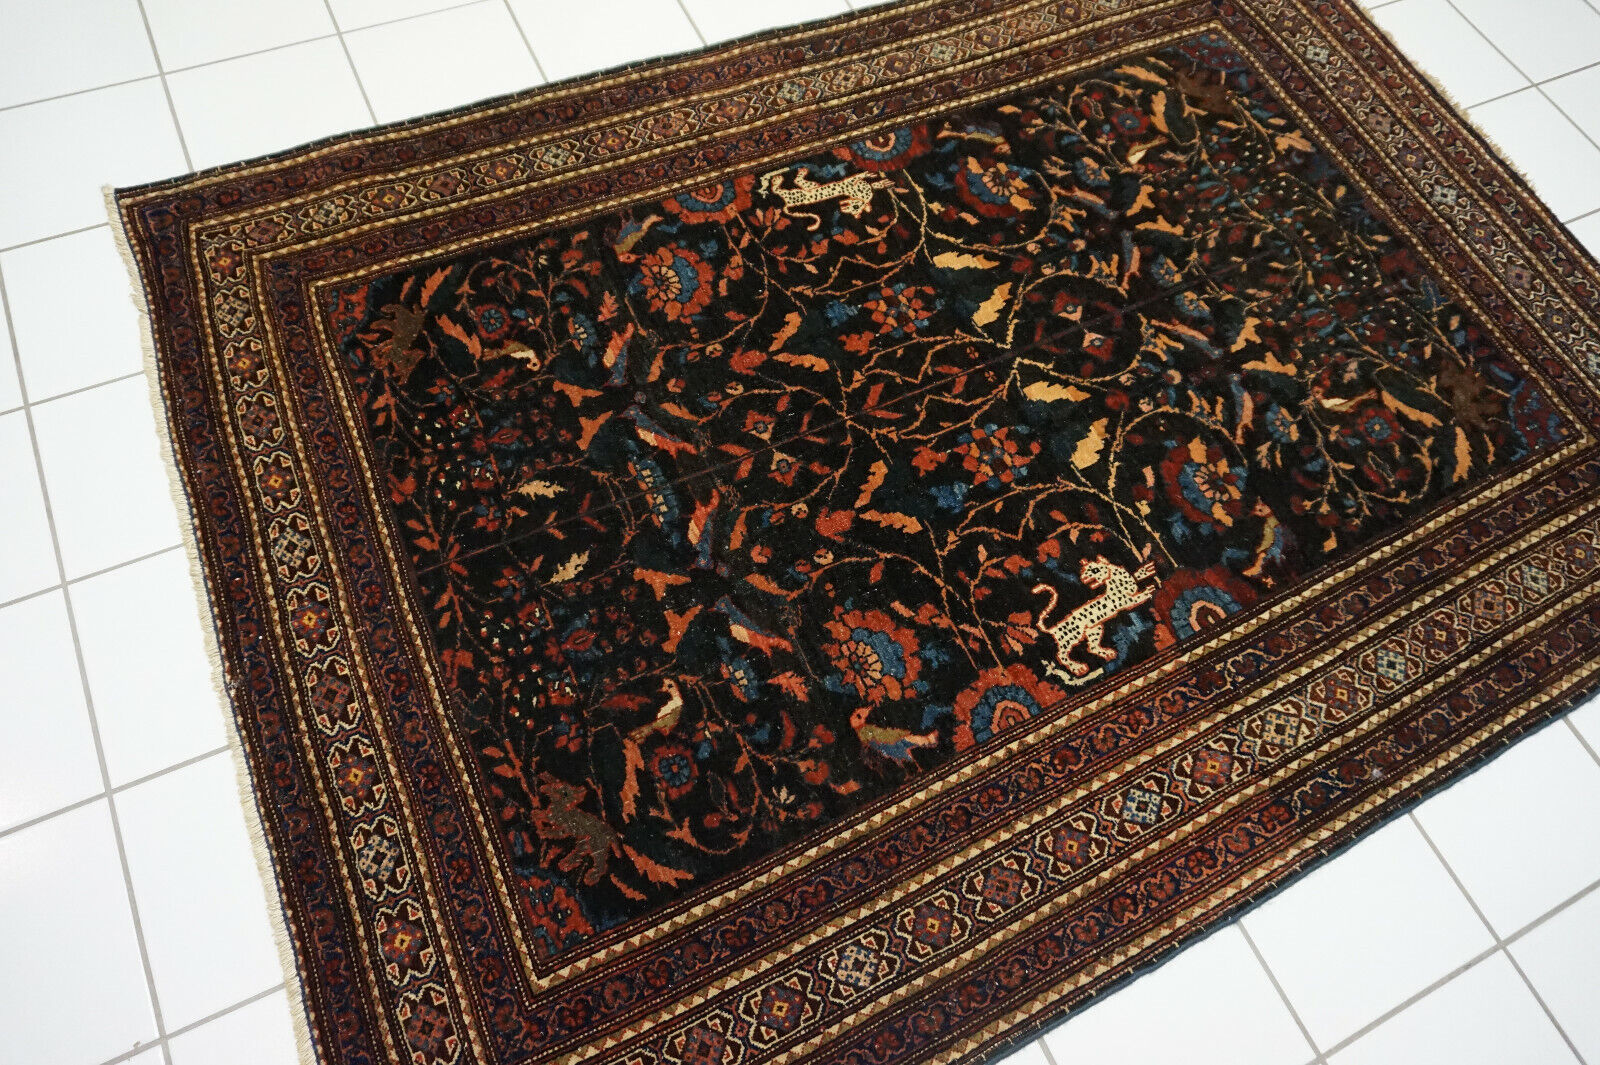 Angled shot of the Handmade Antique Persian Tehran Rug complementing interior decor